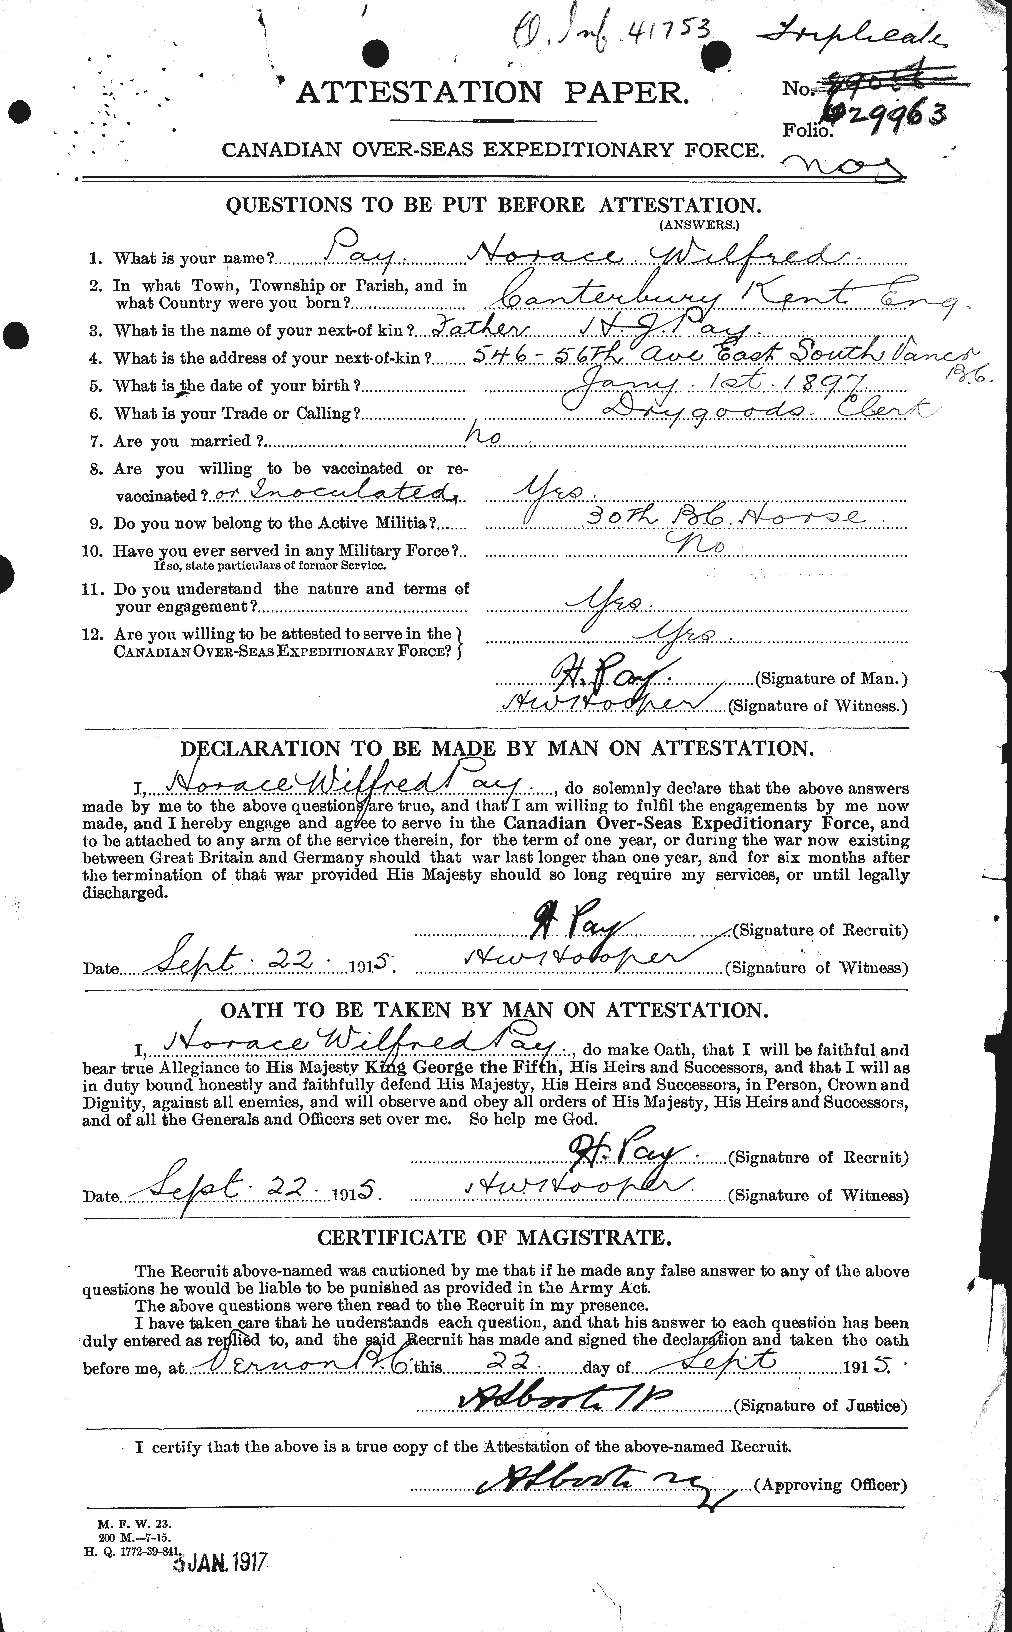 Personnel Records of the First World War - CEF 569703a